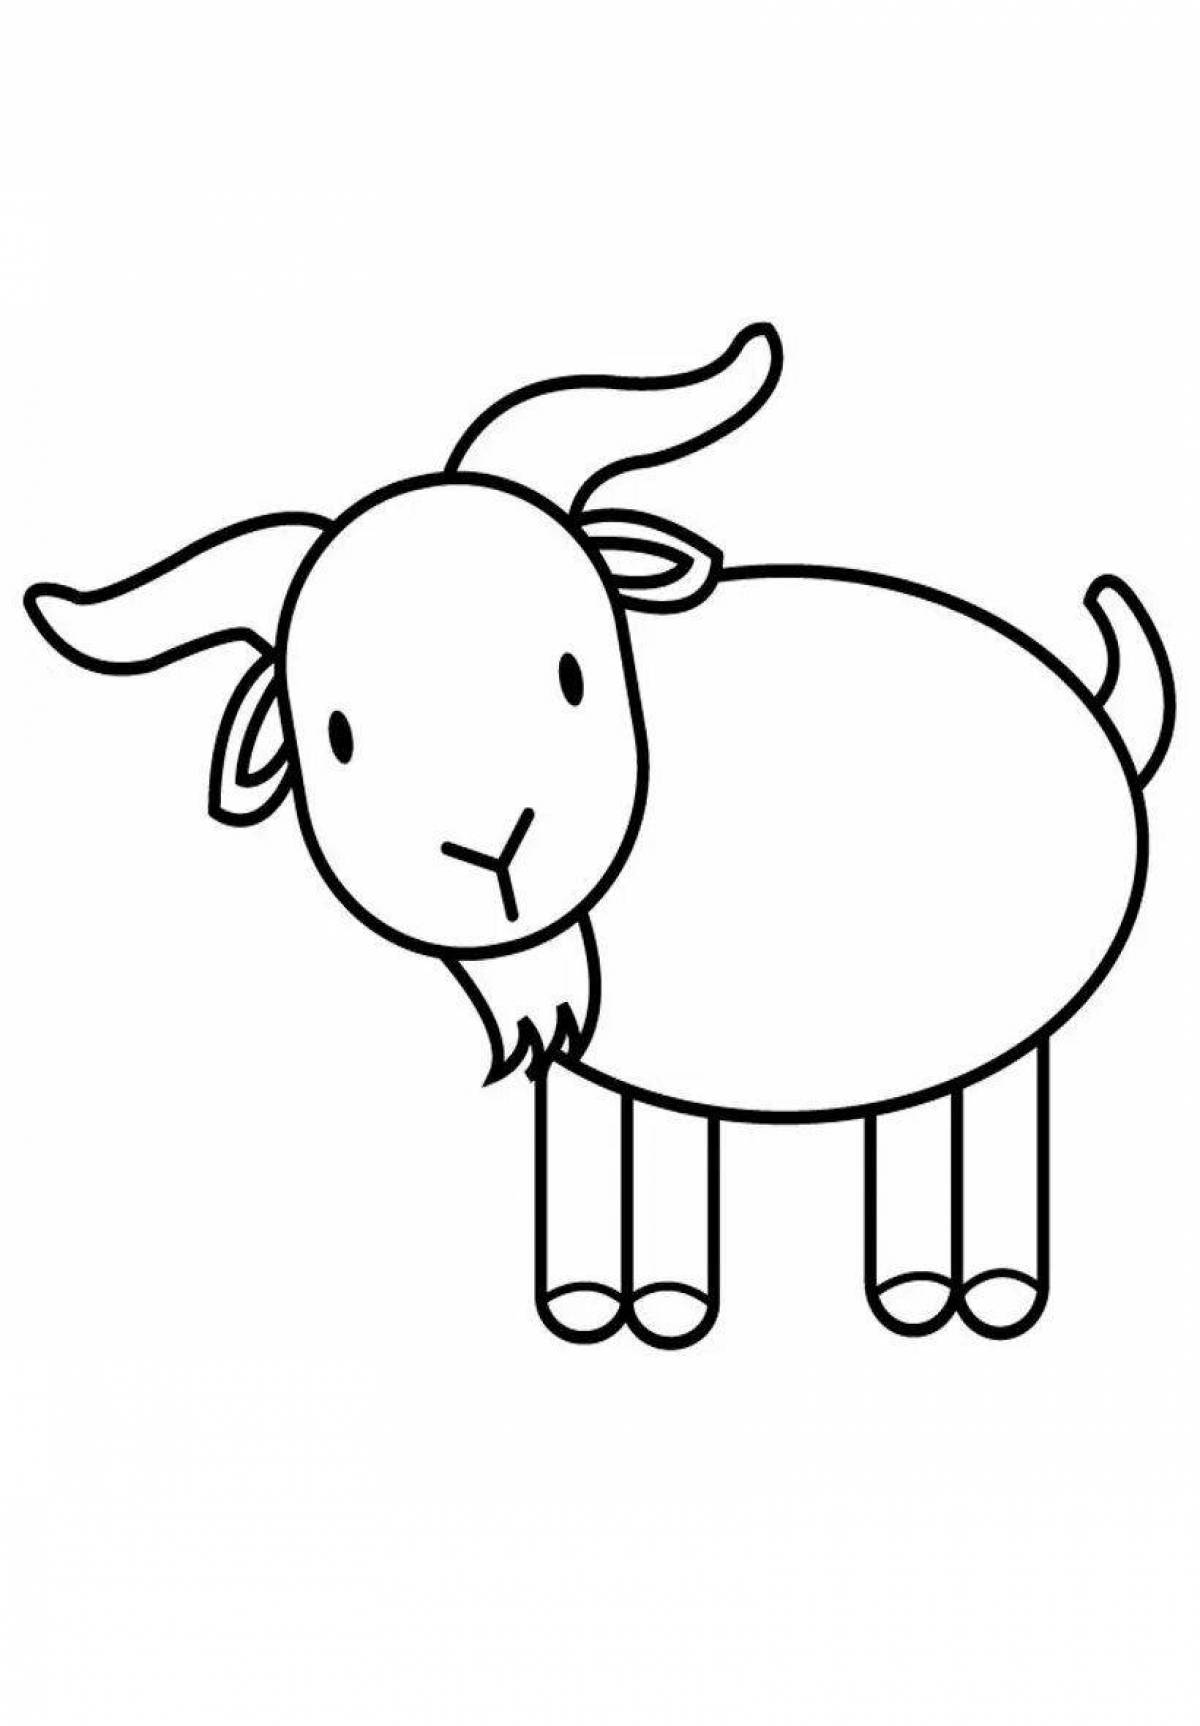 Pleasant goat coloring page for kids